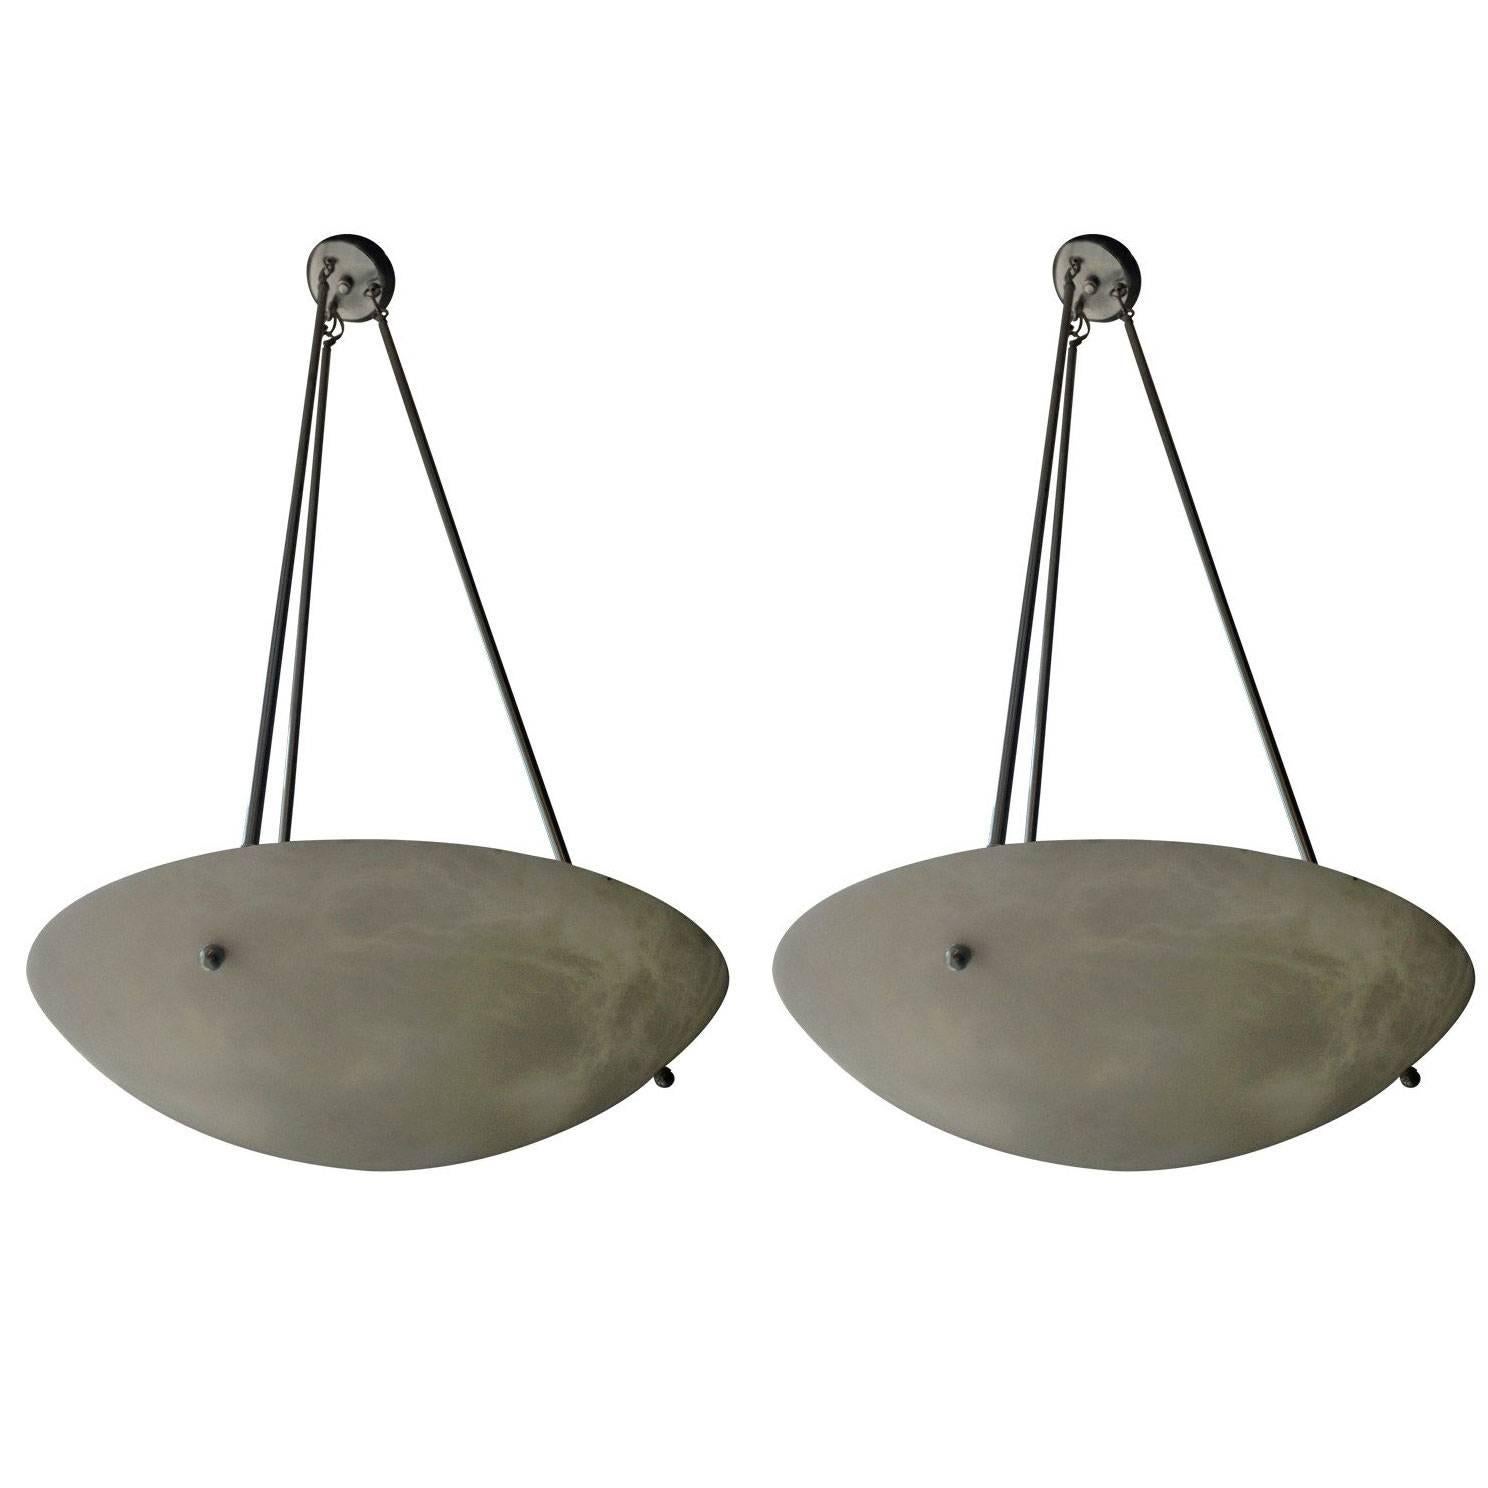 Single or Pair of Large Alabaster Chandeliers